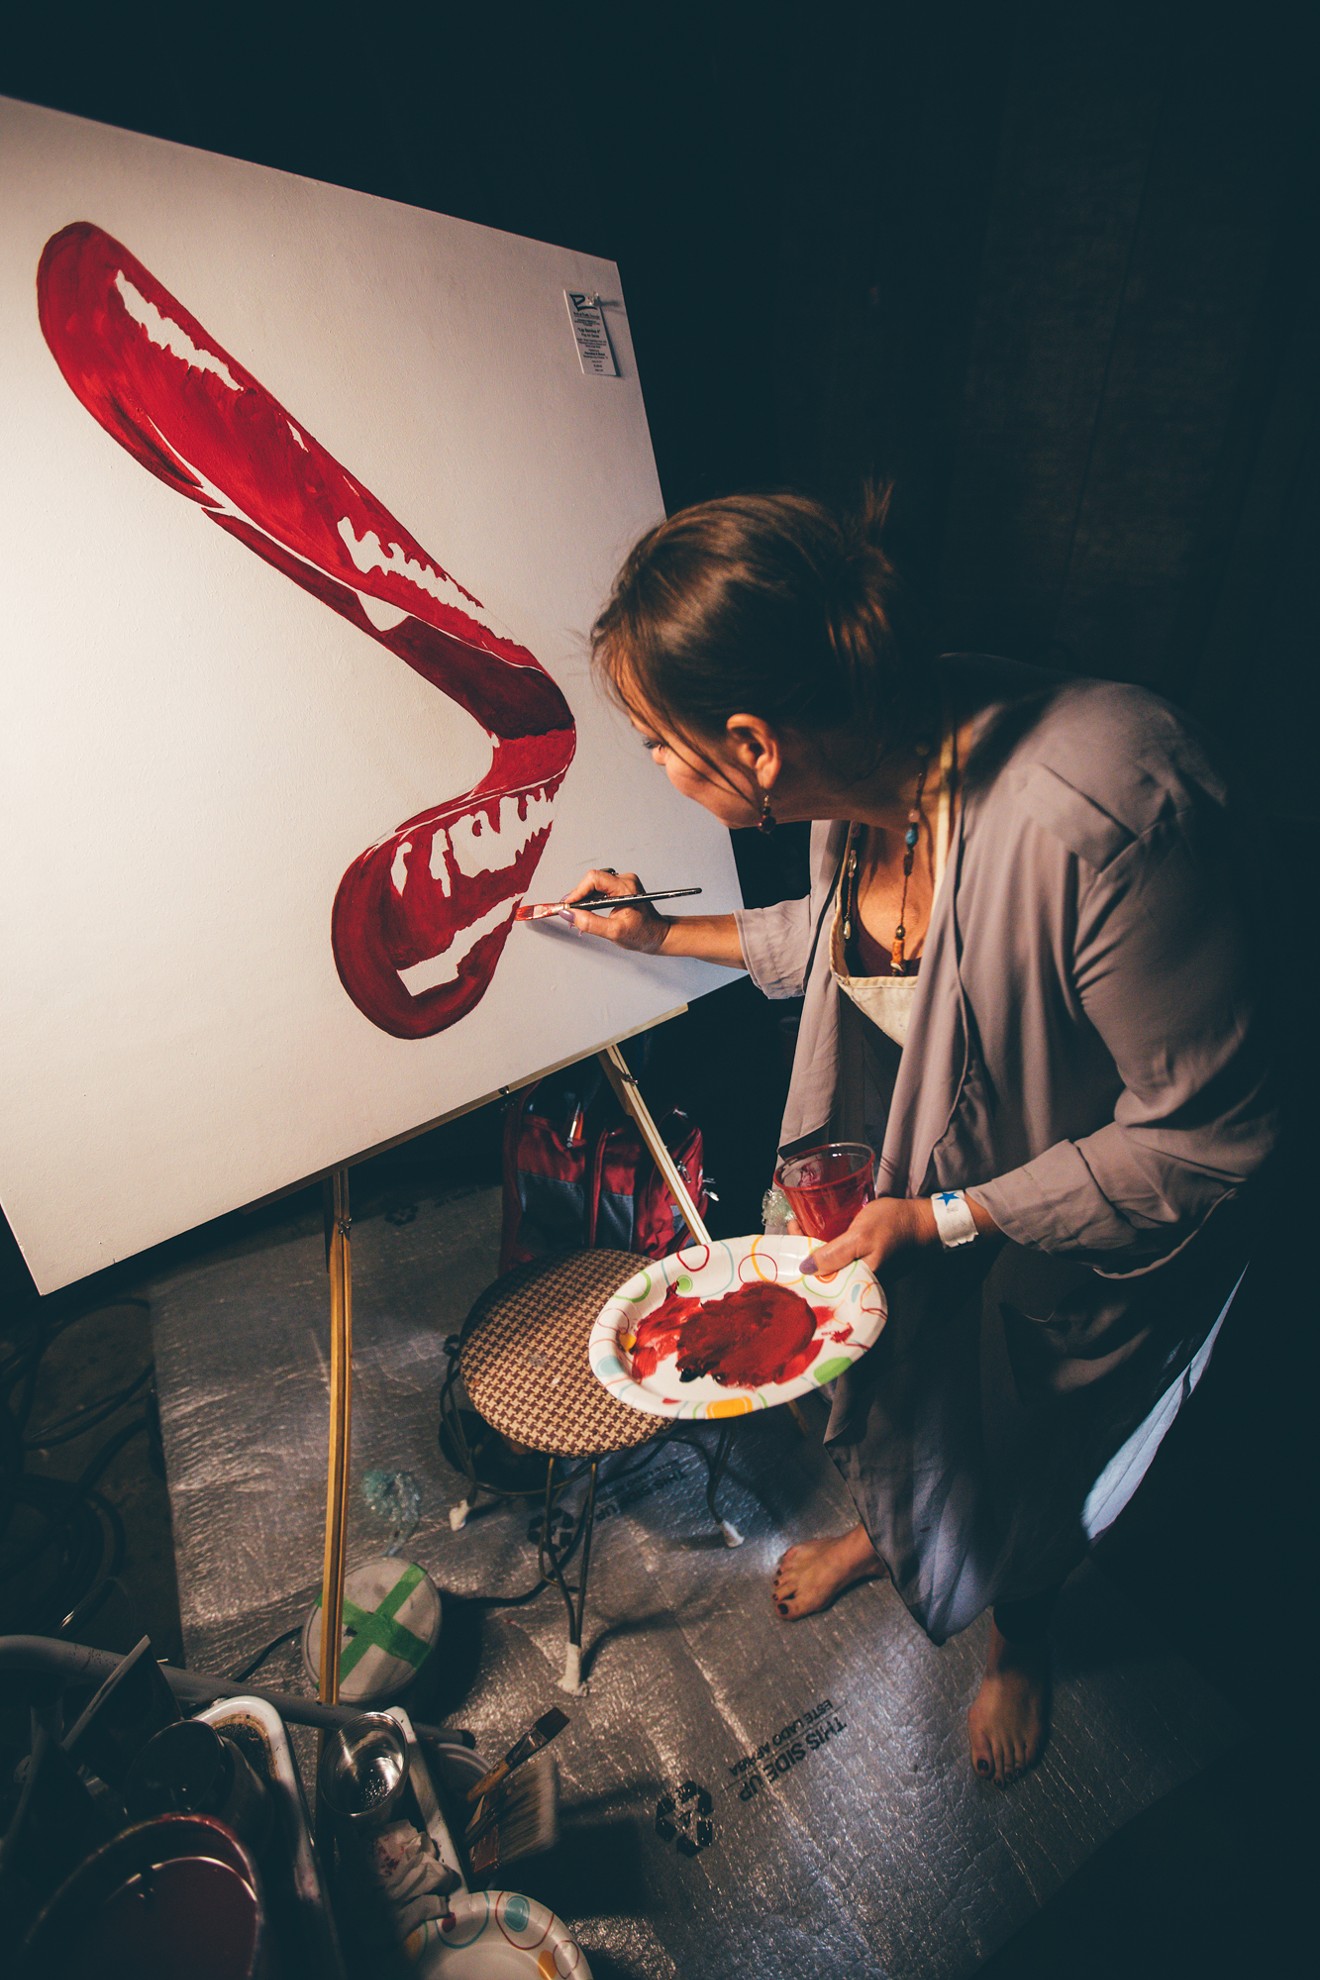 Watch live art be created and eat pancakes at the Pancakes & Booze Art Show.